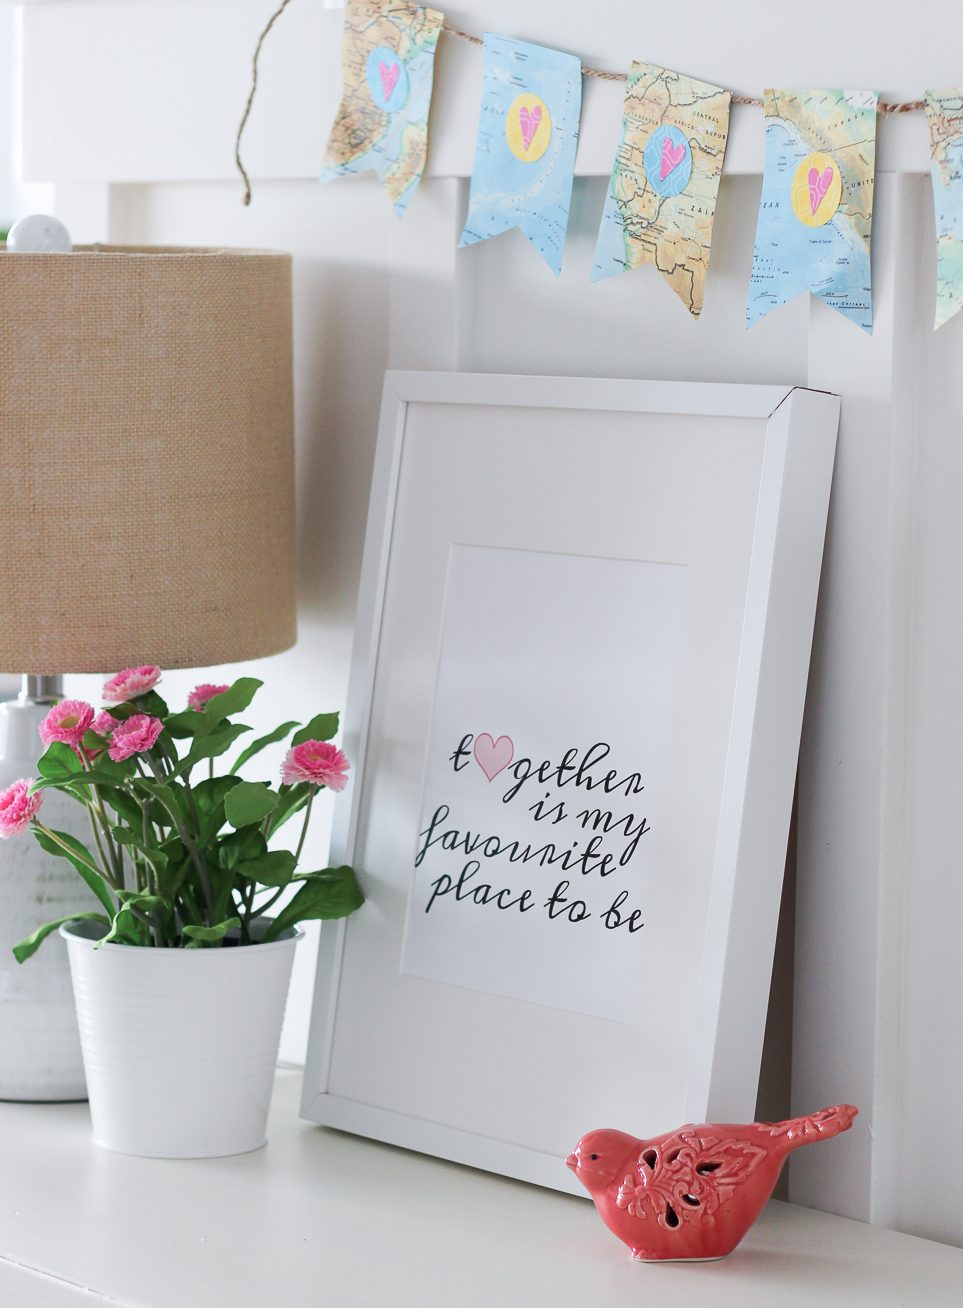 There is a pot of flowers and a little pink bird beside the printable.